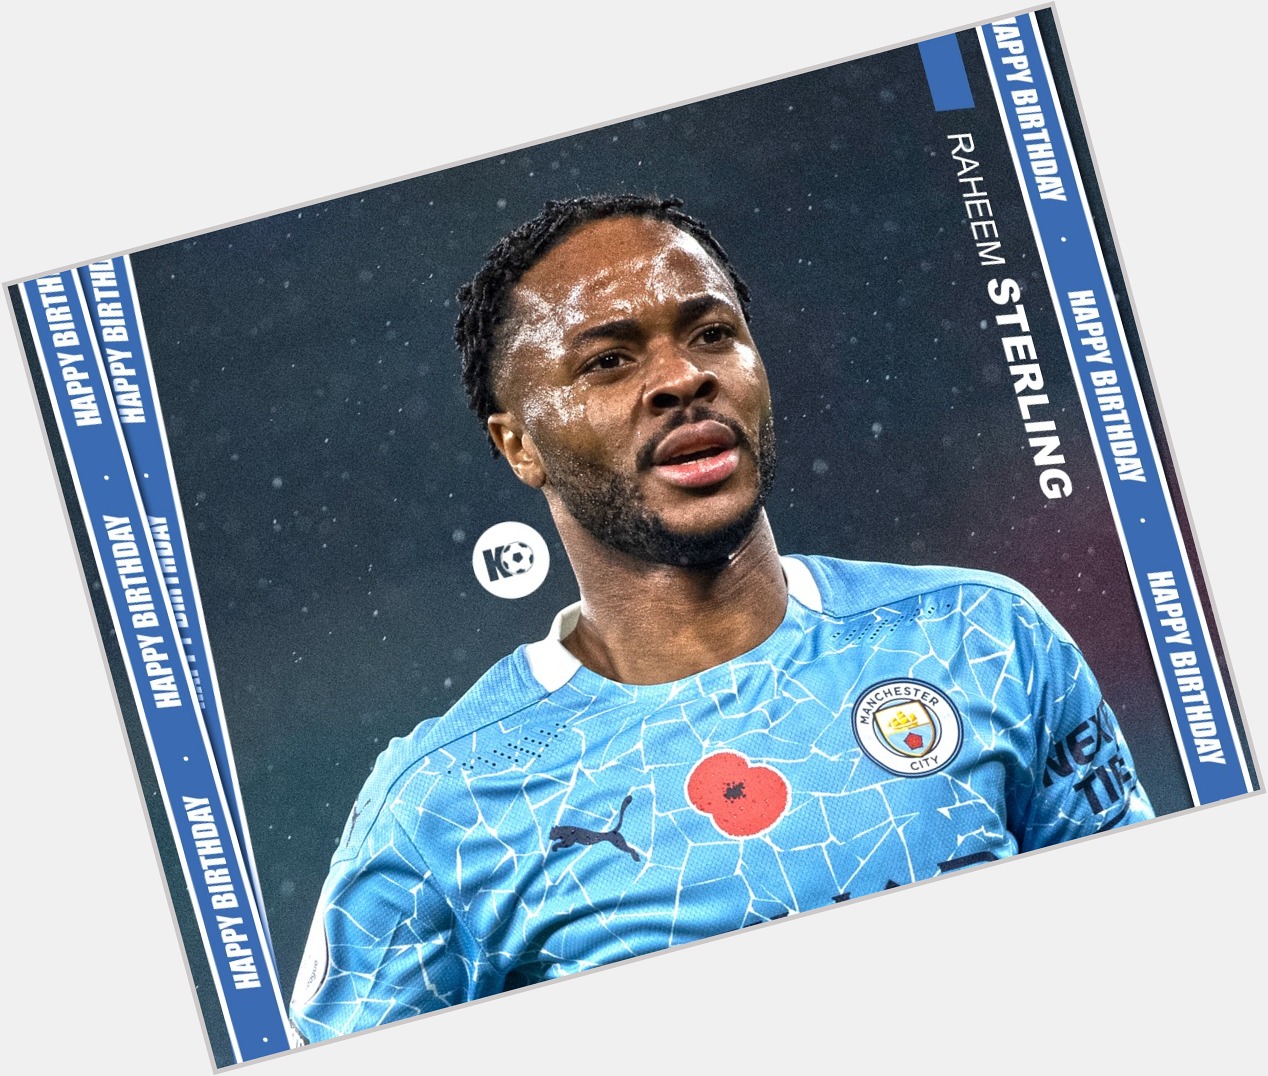 Join in wishing Manchester City winger Raheem Sterling a Happy Birthday! 